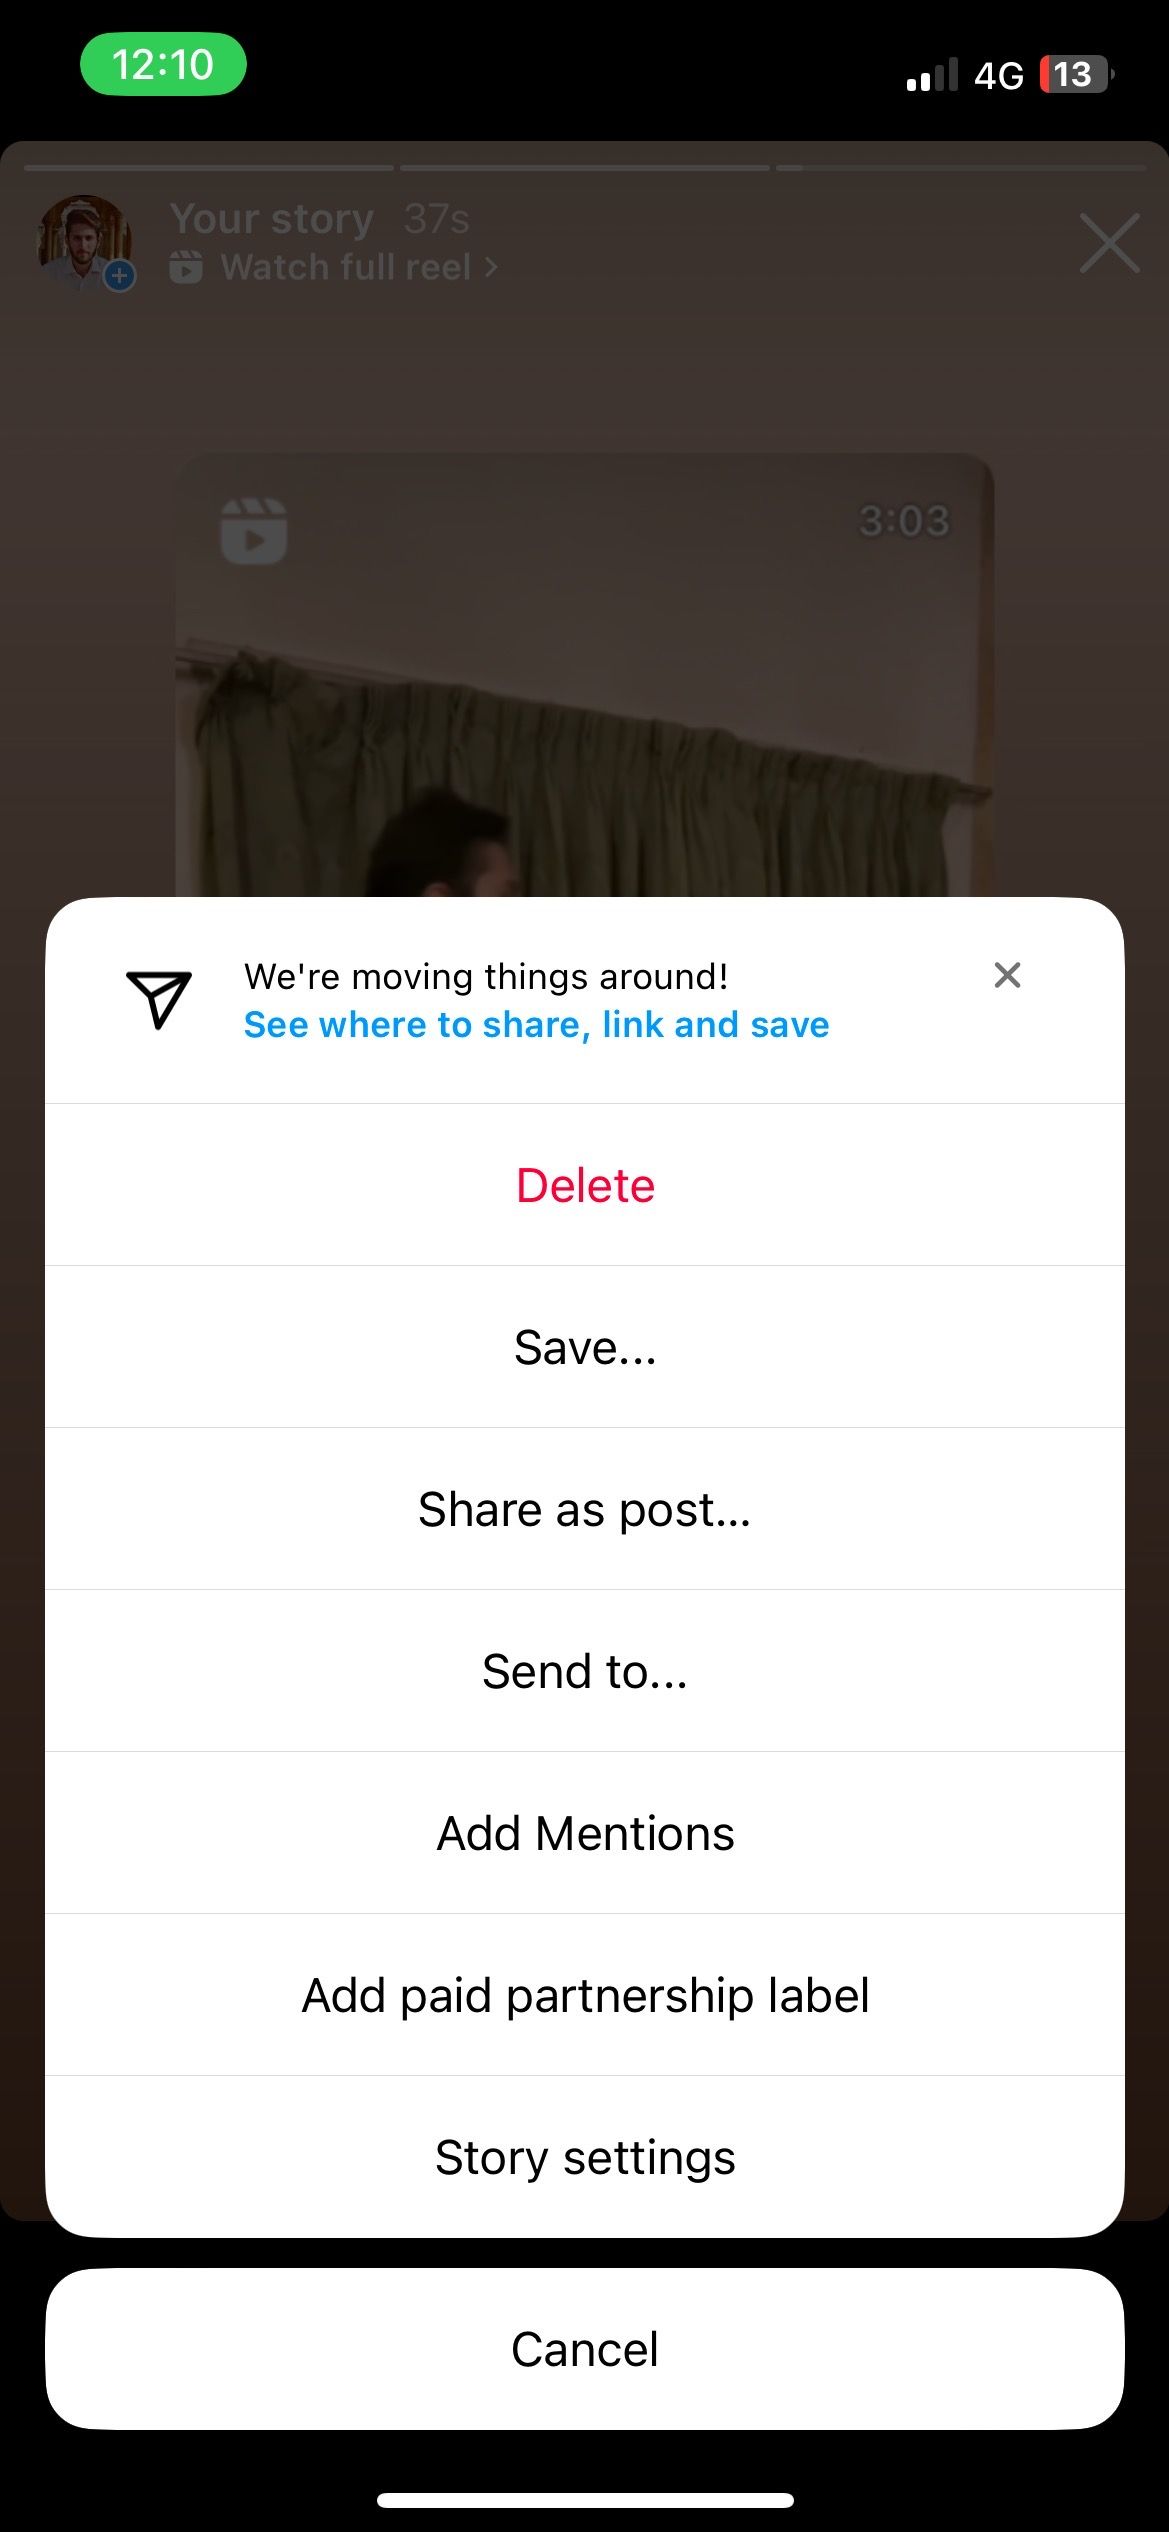 Select Add Mentions